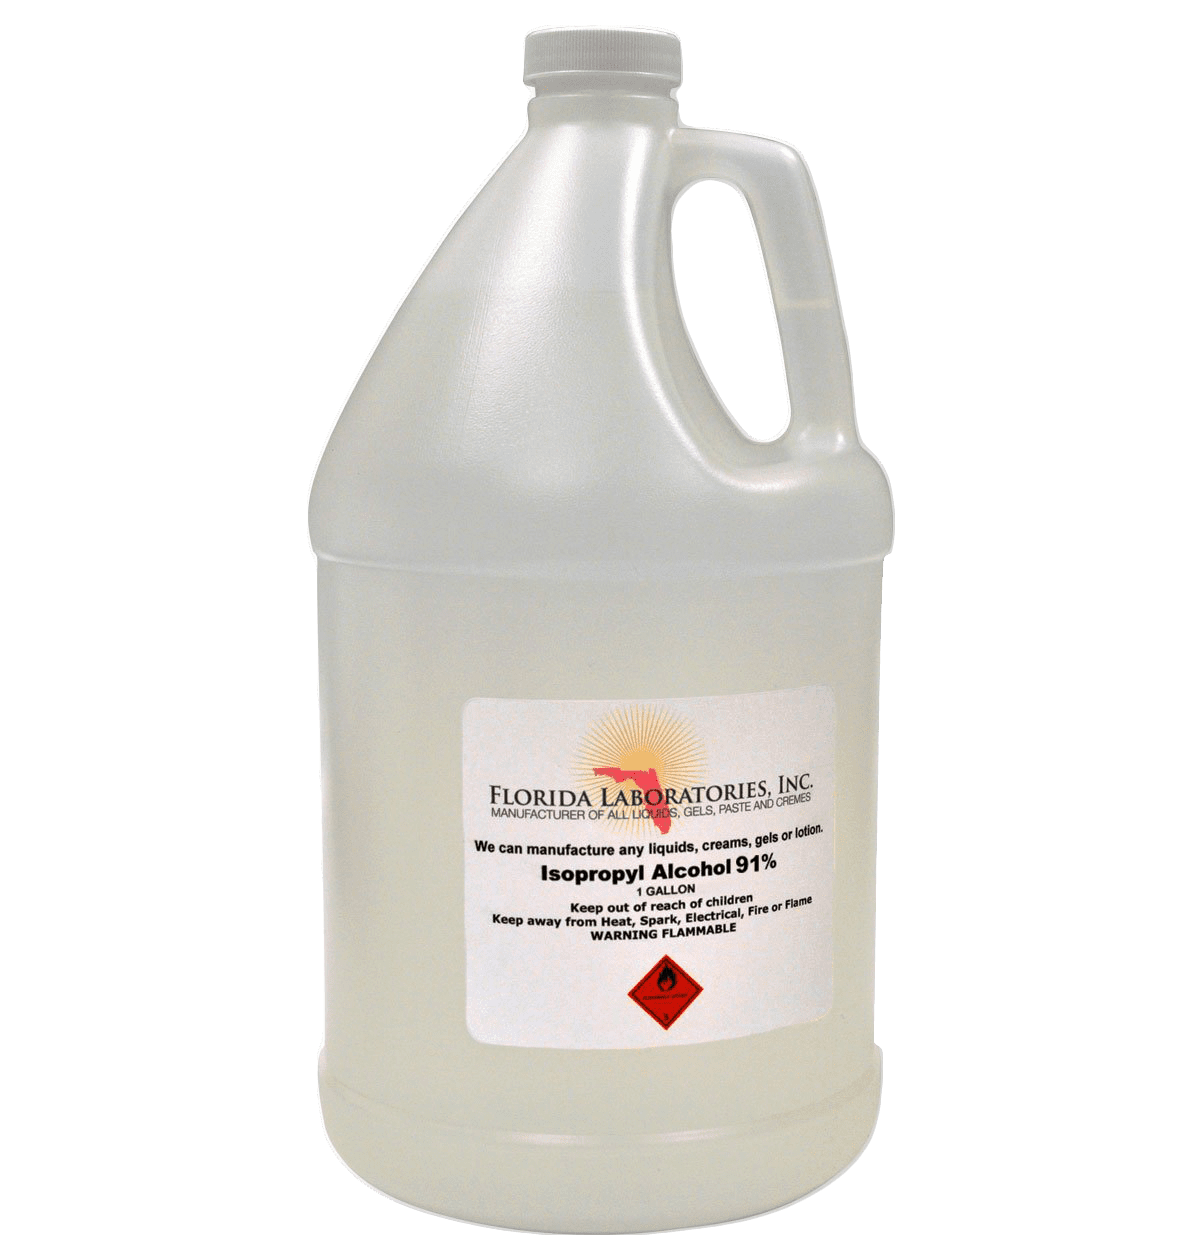 Isopropyl Alcohol 91% Anhydrous